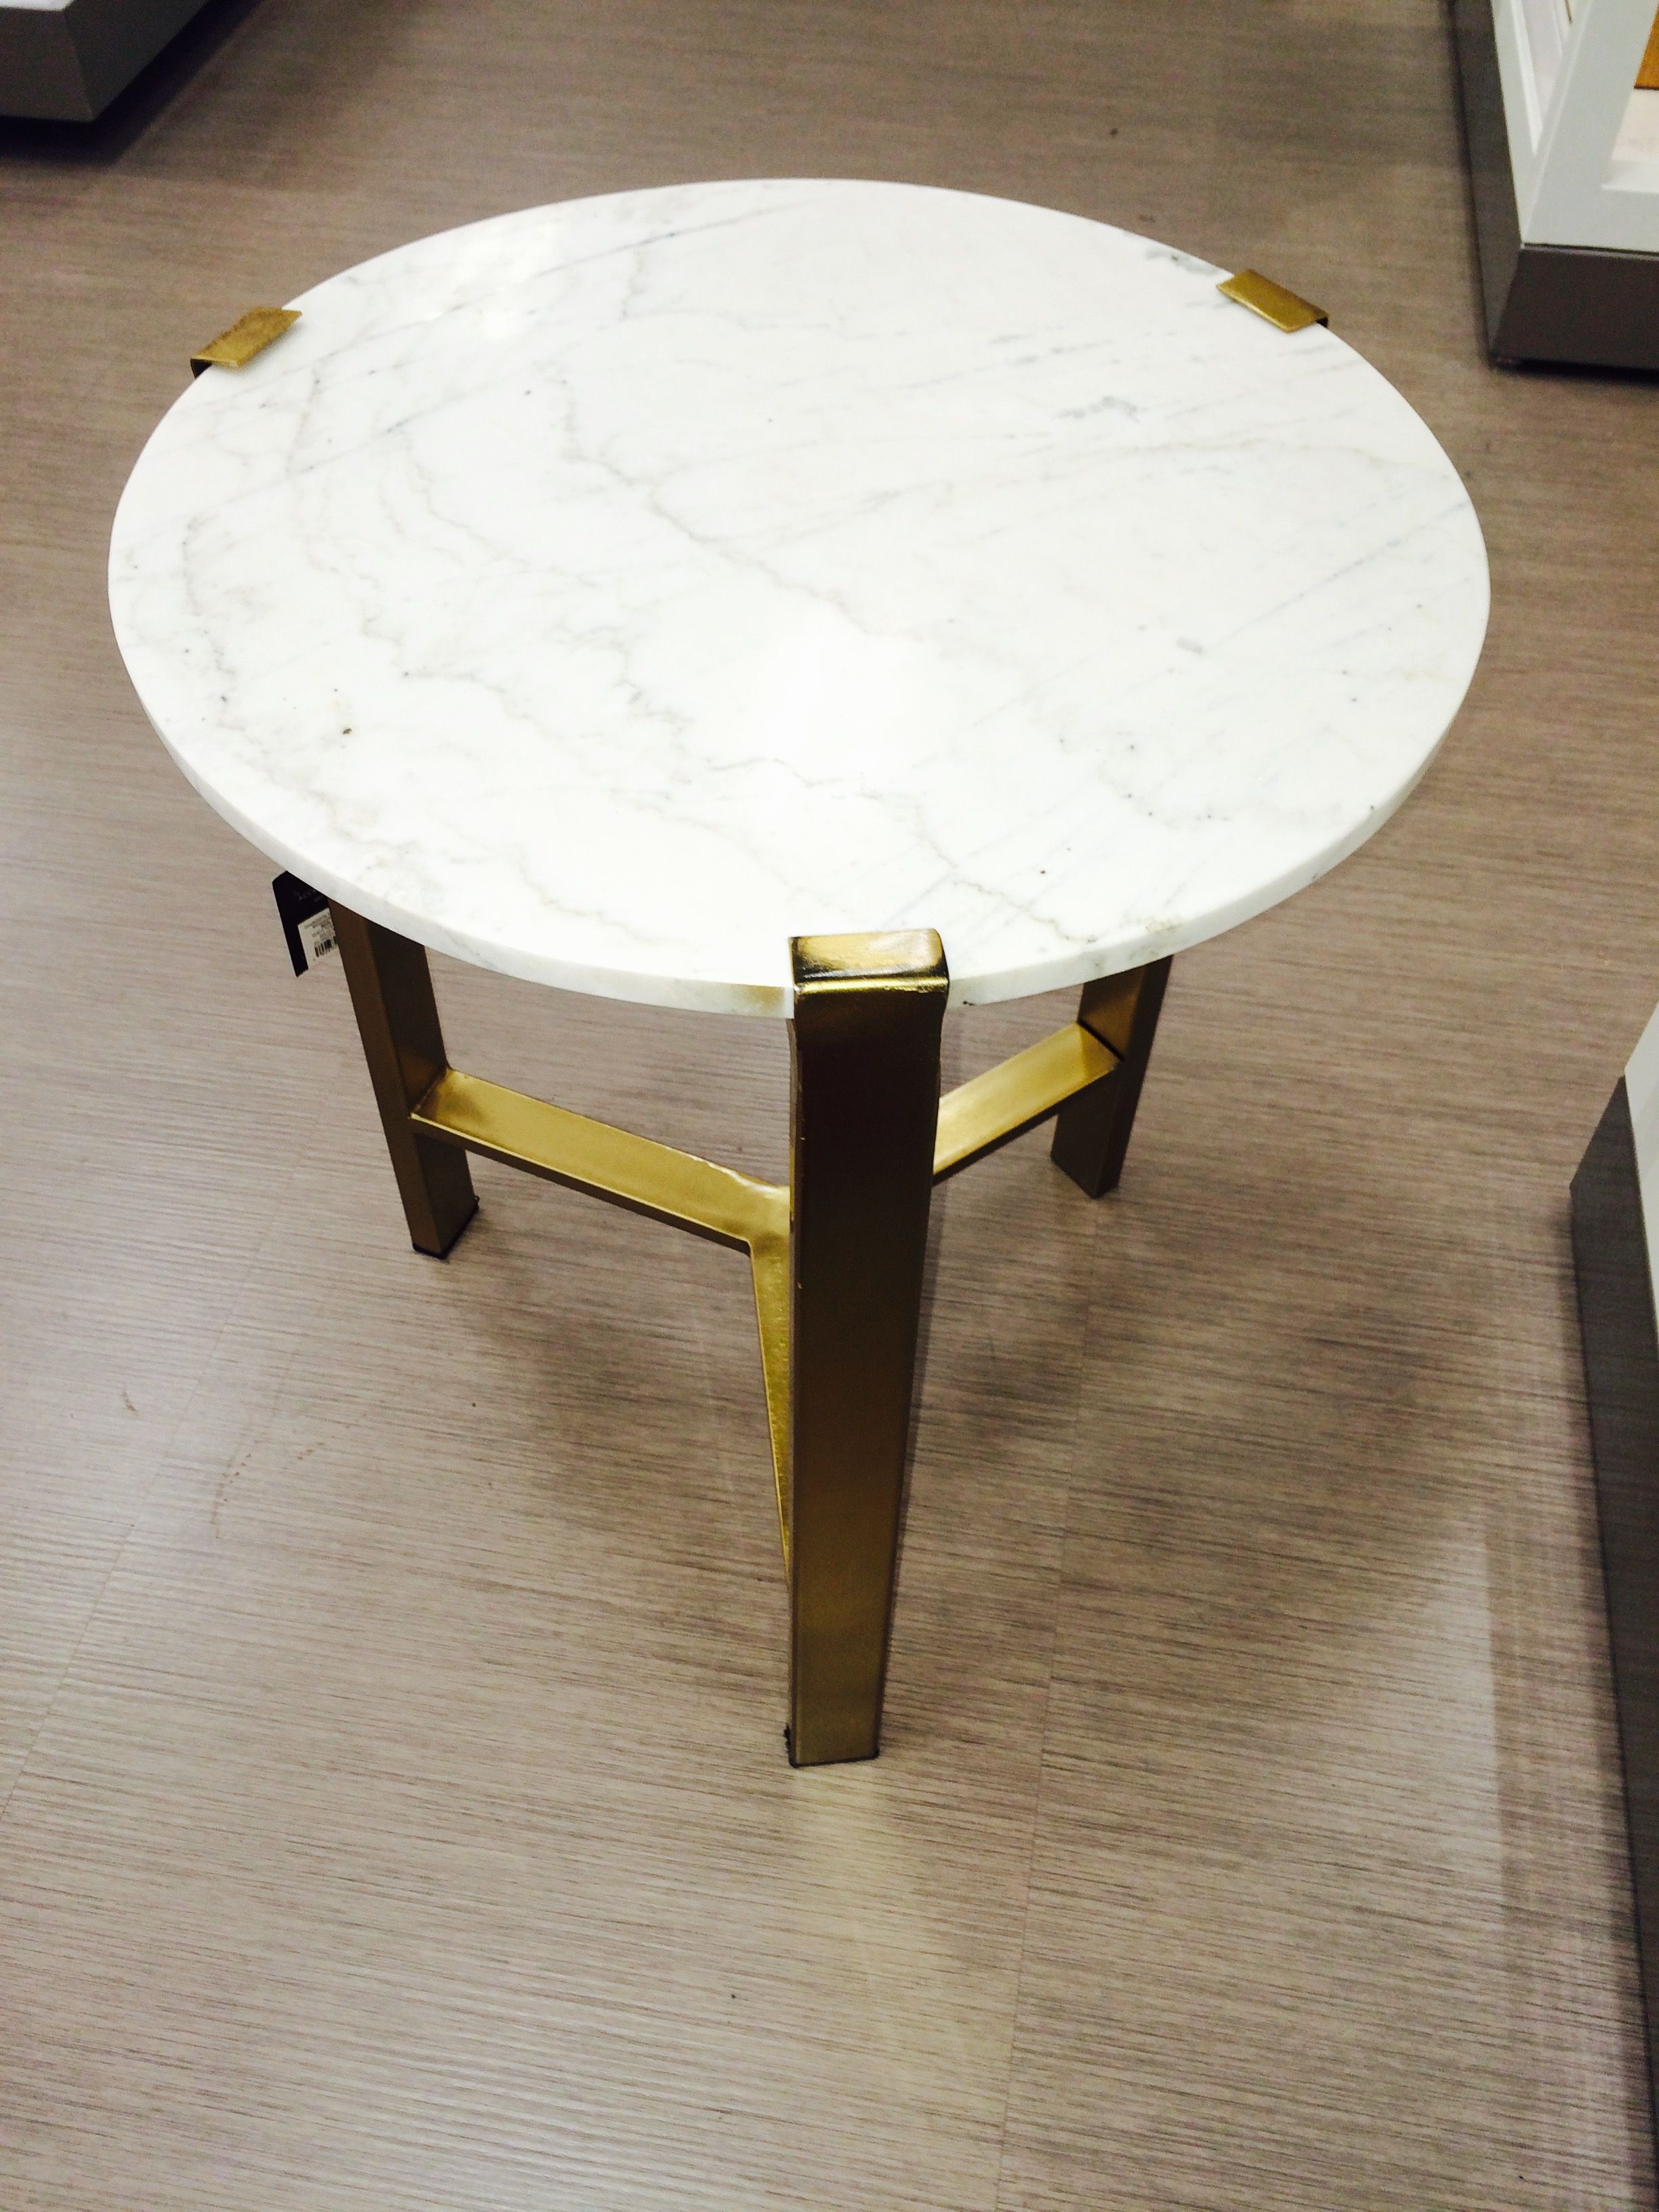 nate berkus for target gold accent table with marble top the ashley furniture bedding narrow side cabinet end covers square metal pedestal round glass and chrome pine bedside